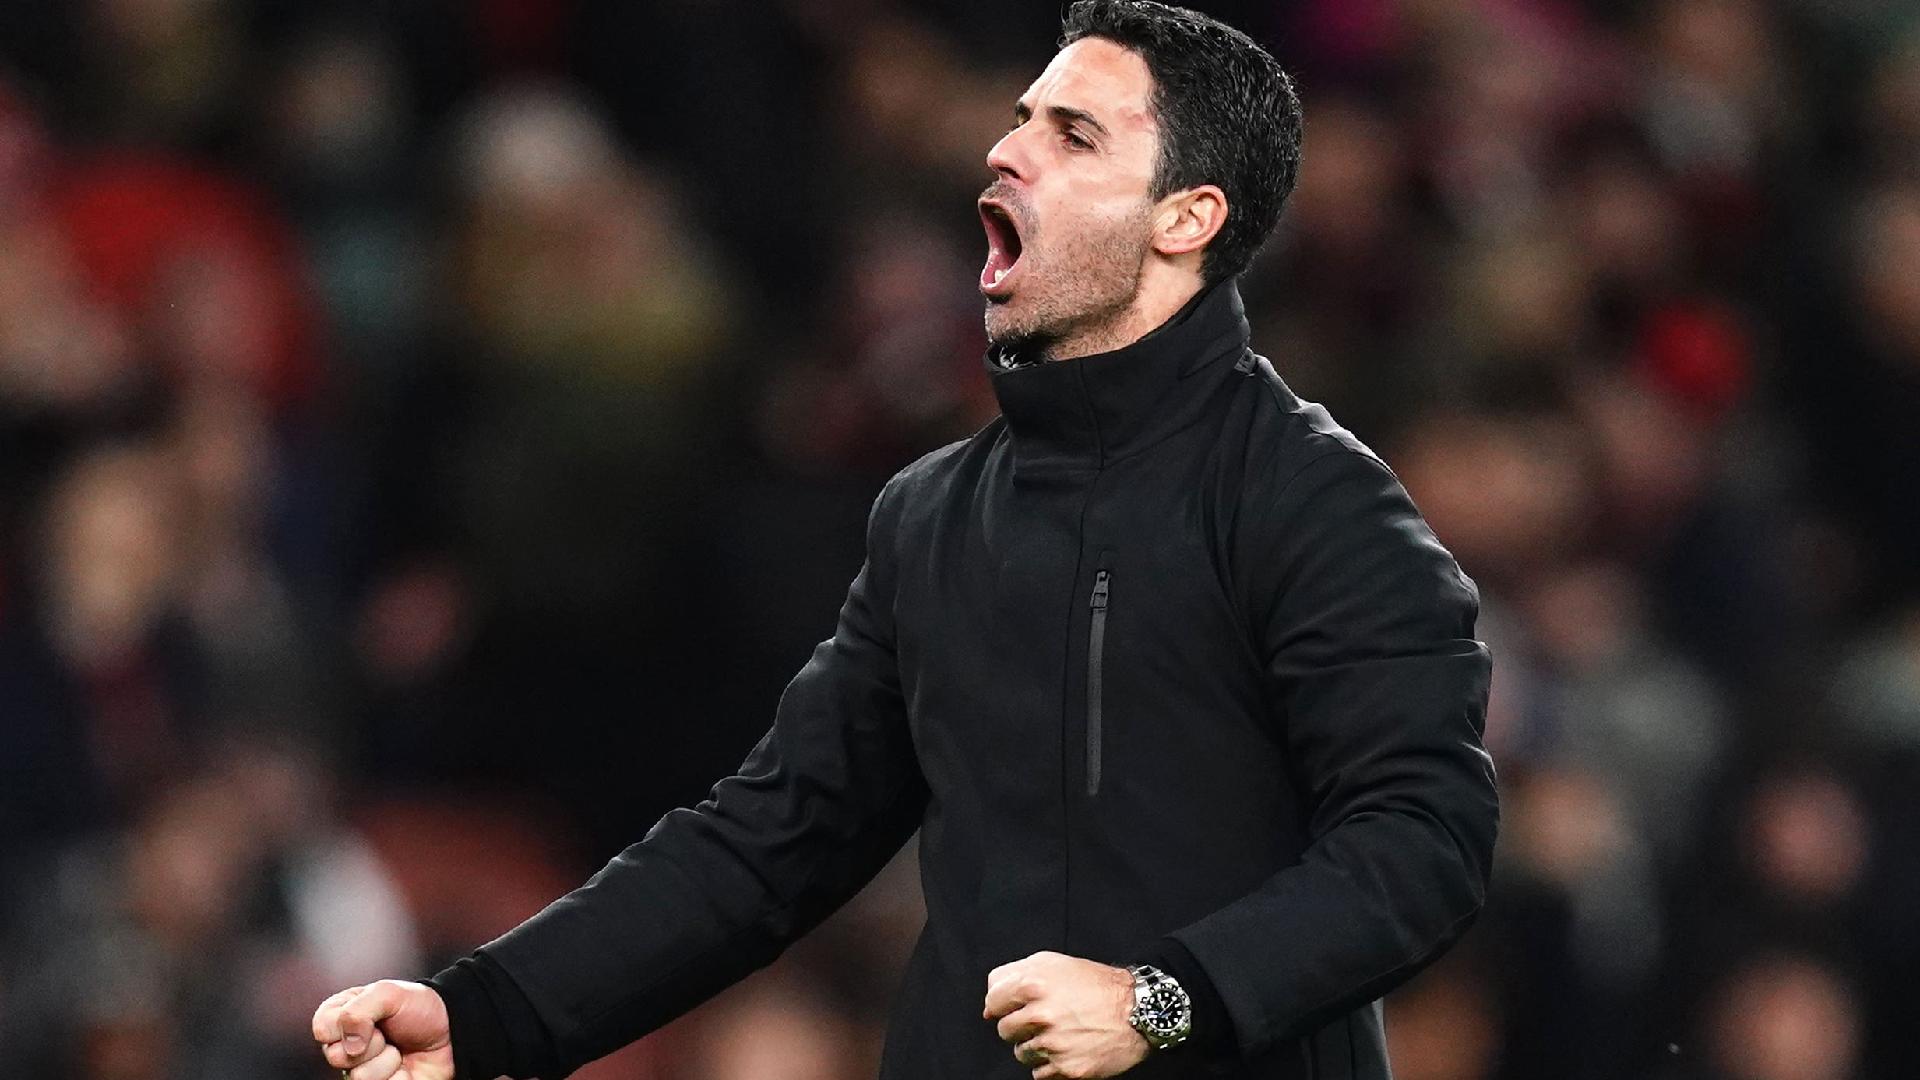 Mikel Arteta doesn’t see Arsenal’s celebrations affecting title challenge